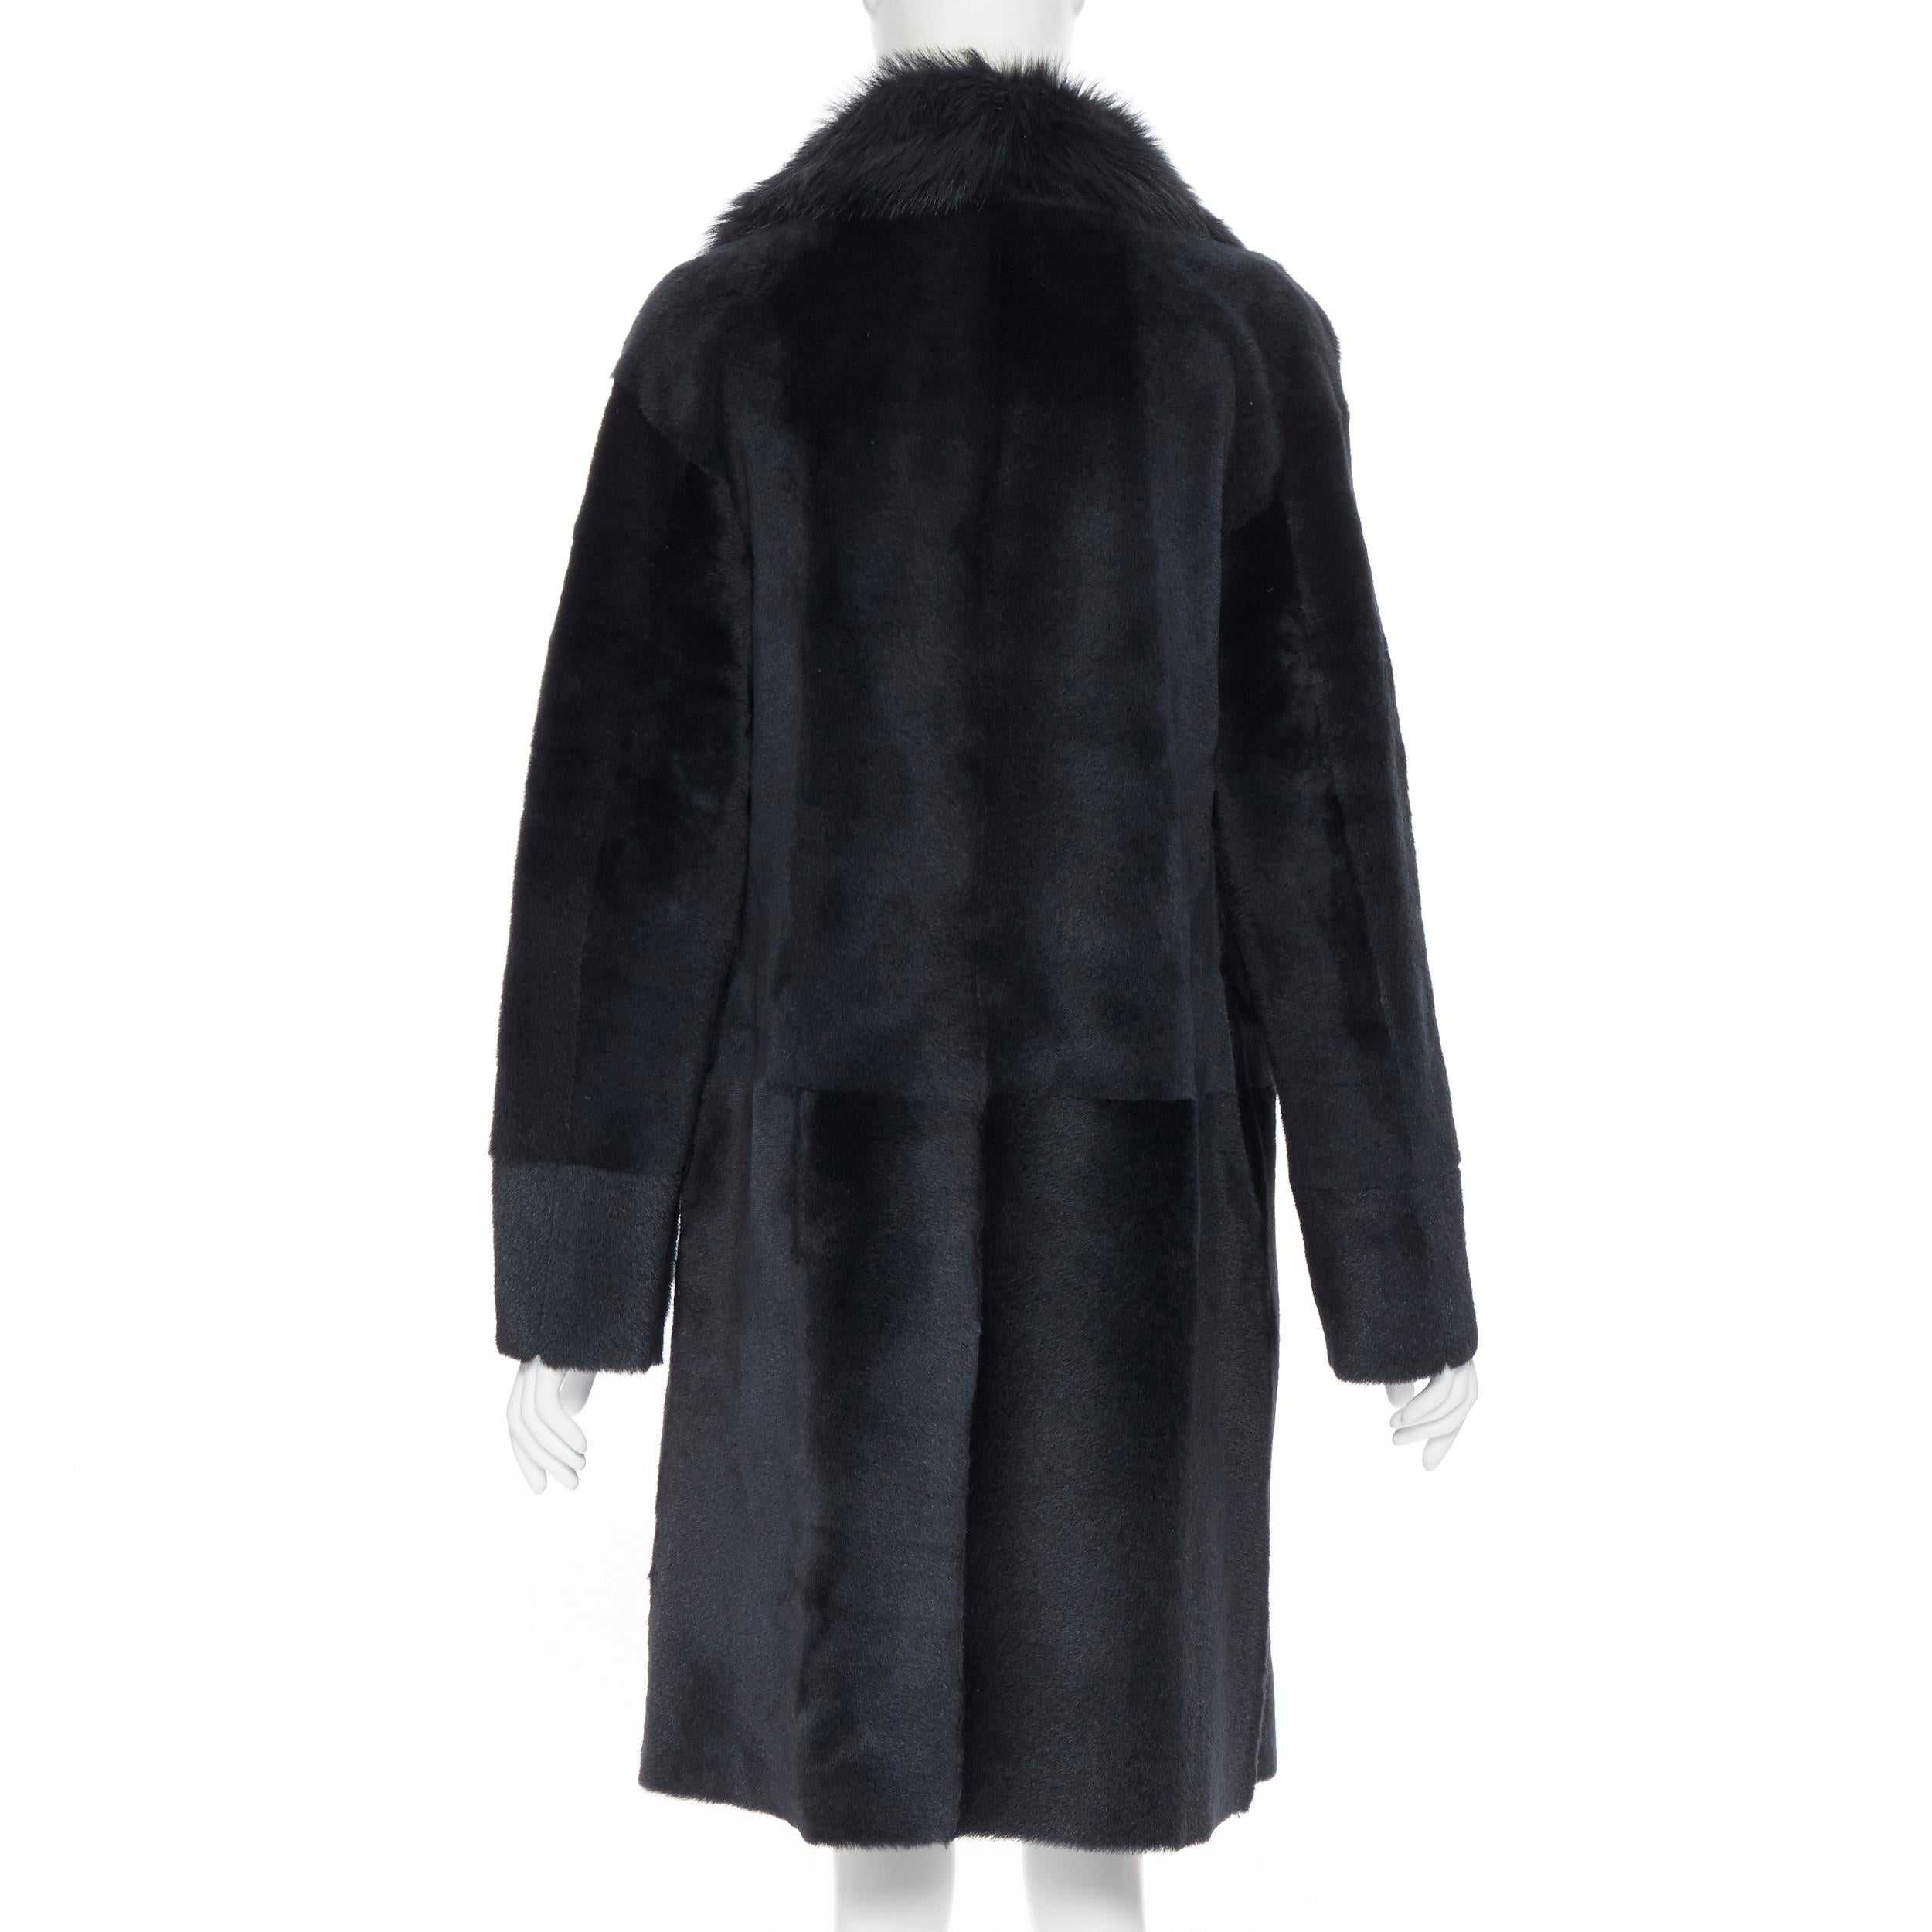 Women's THEORY black dyed shearling lamb genuine fur leather oversized winter coat XS